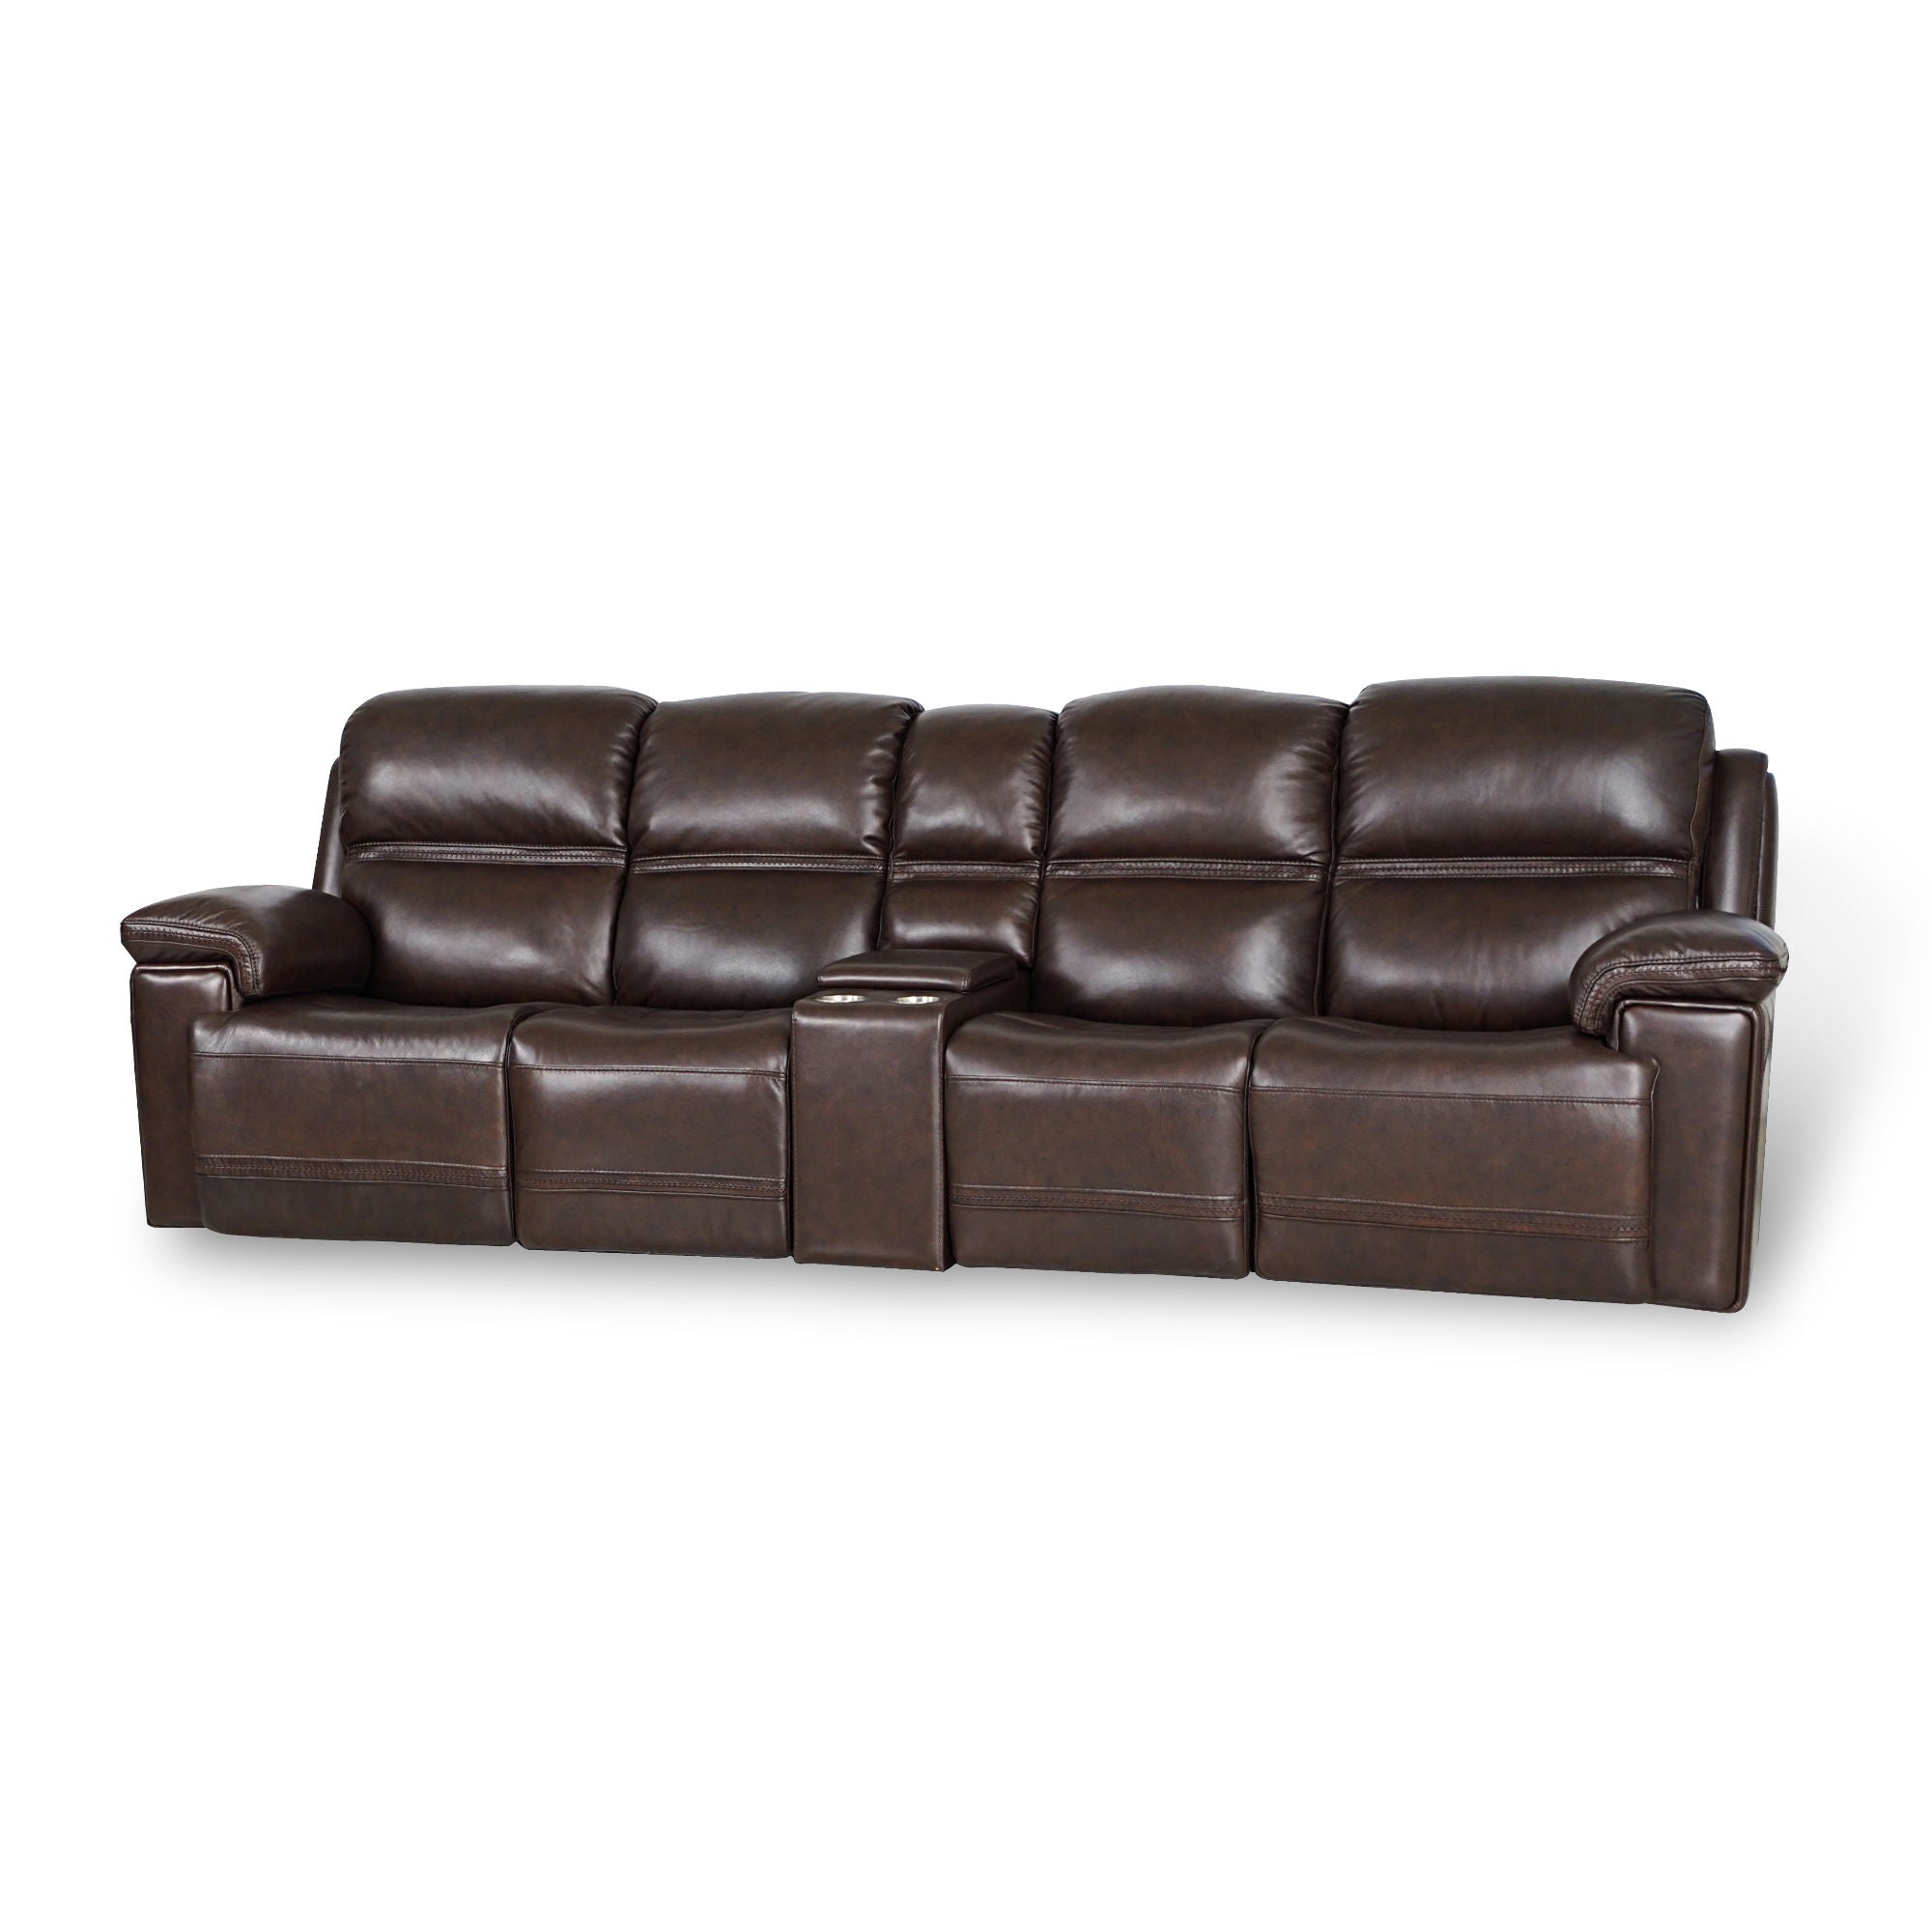 Timo Top Grain Leather Power Reclining 4 Seater Sofa With Console, Adjustable Headrest, Big Size, Cross Stitching